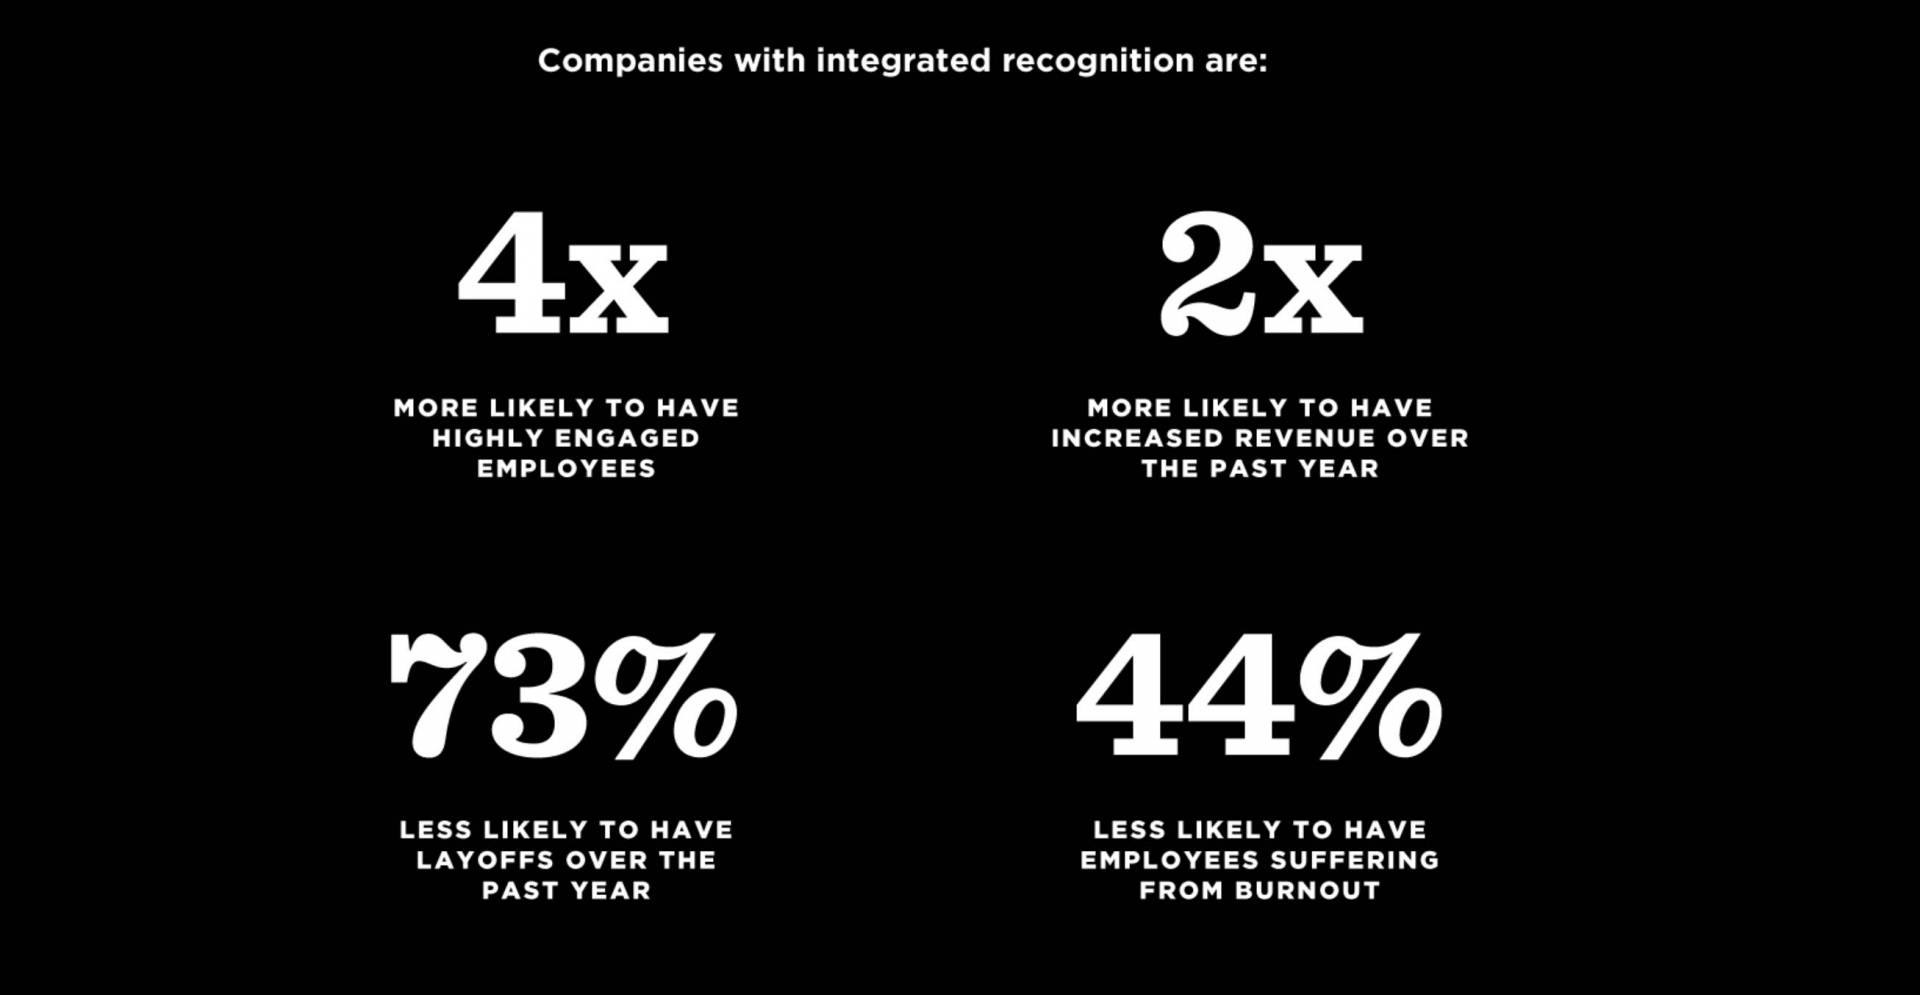 Companies Who Provide Recognition Receive Better Employee Outcomes